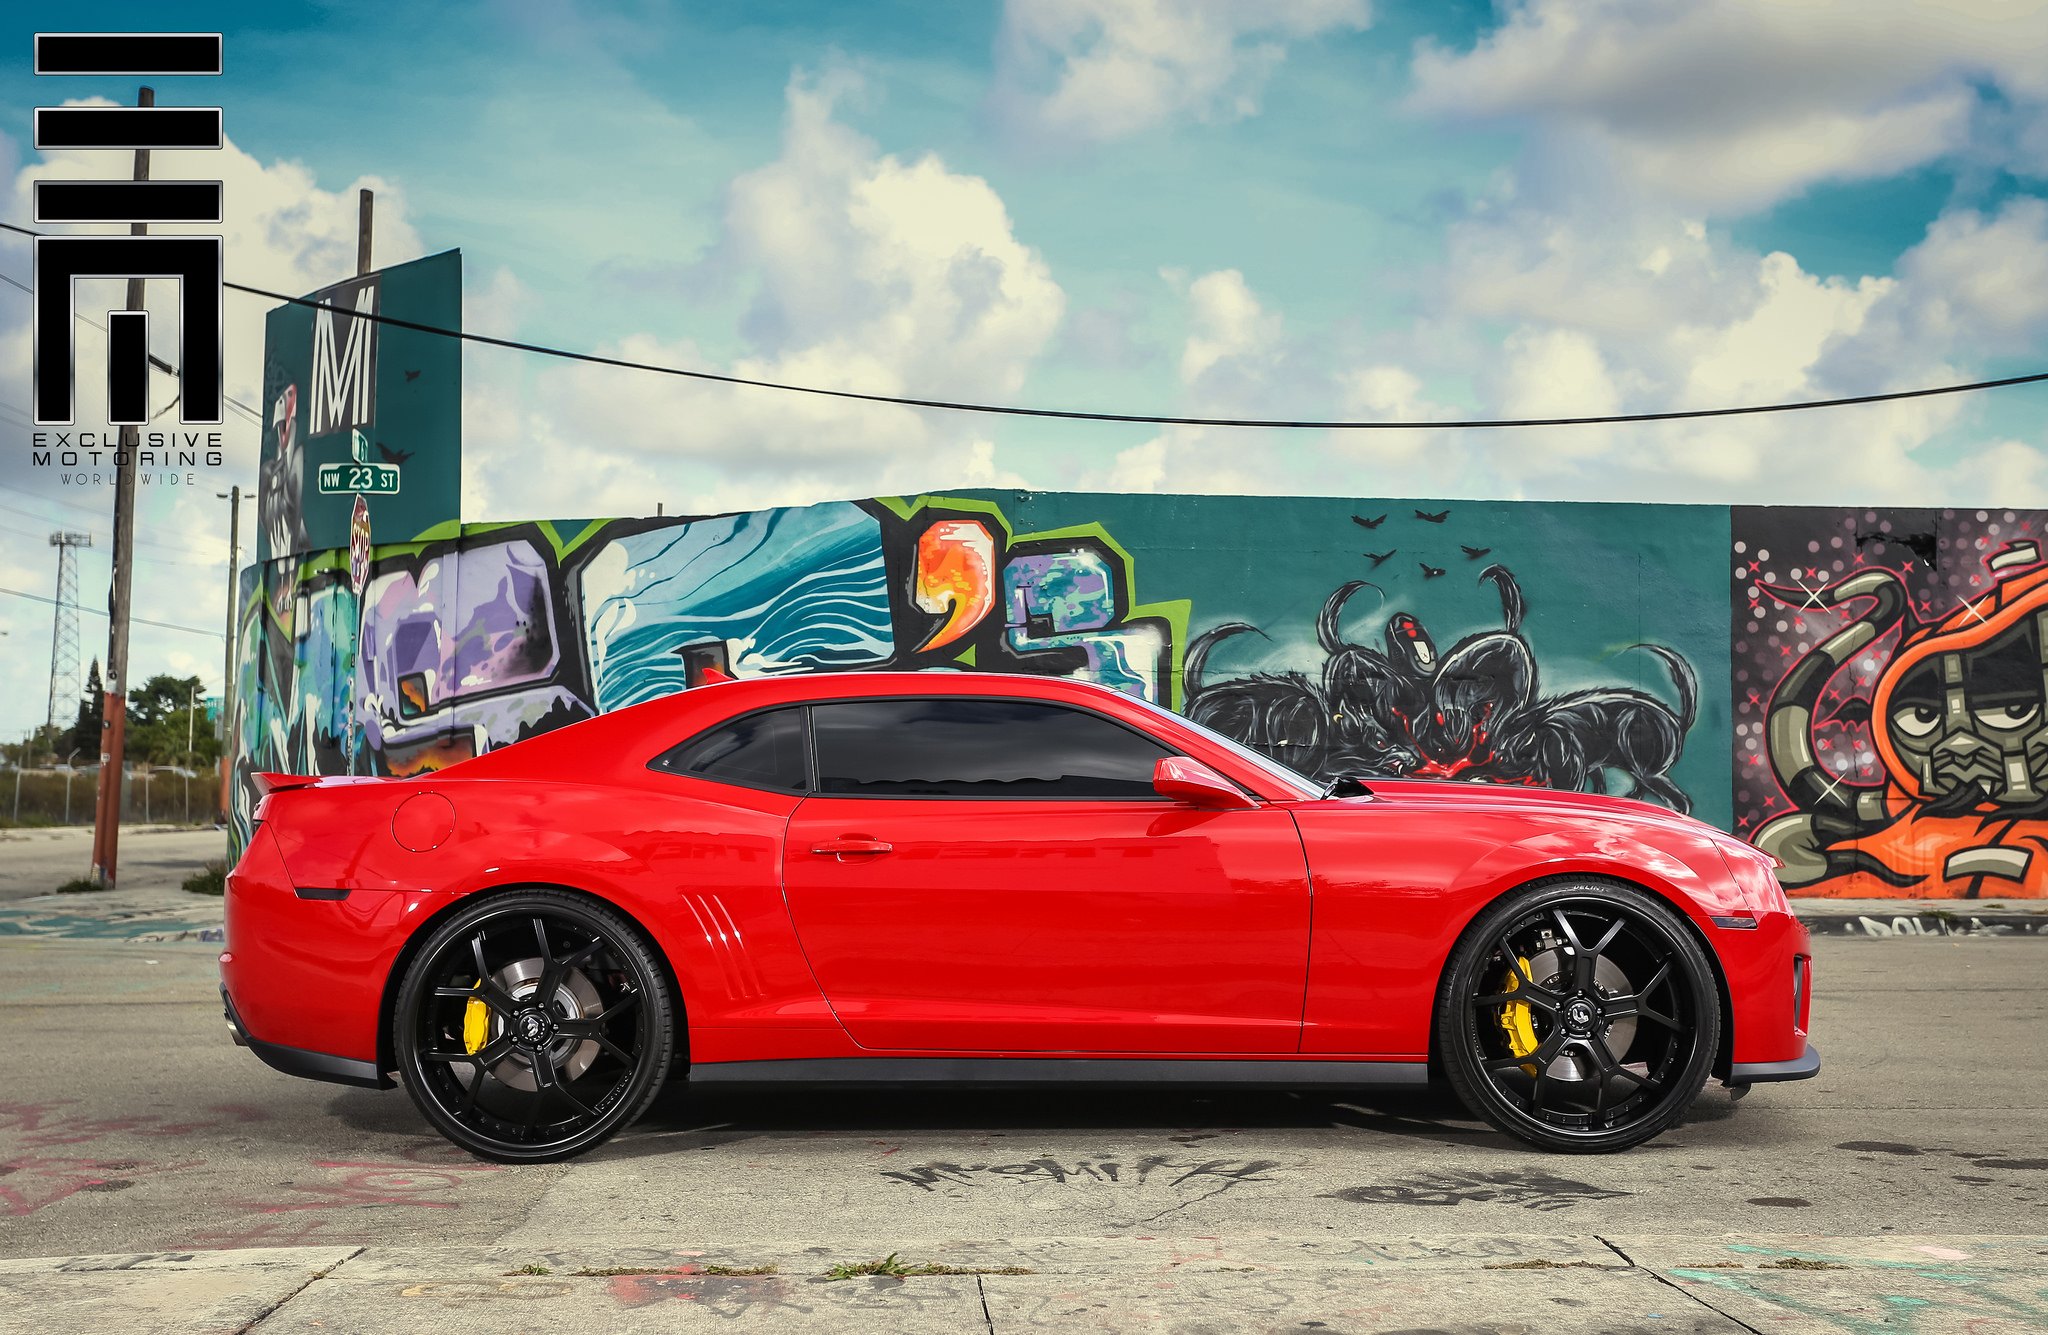 Chevrolet Camaro ZL1 against graffiti wall - Photo by Exclusive Motoring